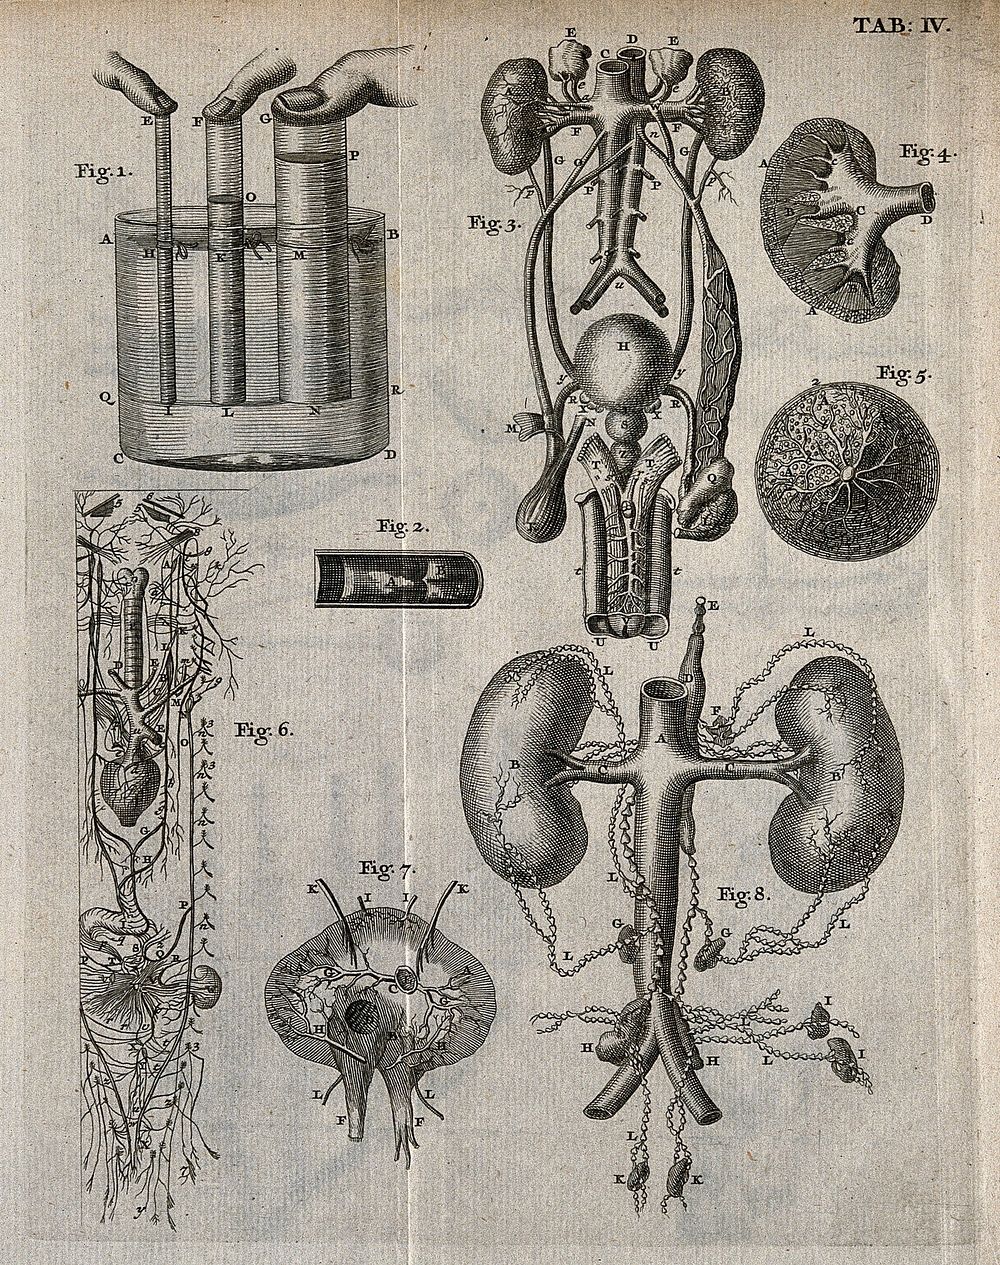 Lymphatic, genitourinary and nervous systems. Engraving, 18th century.